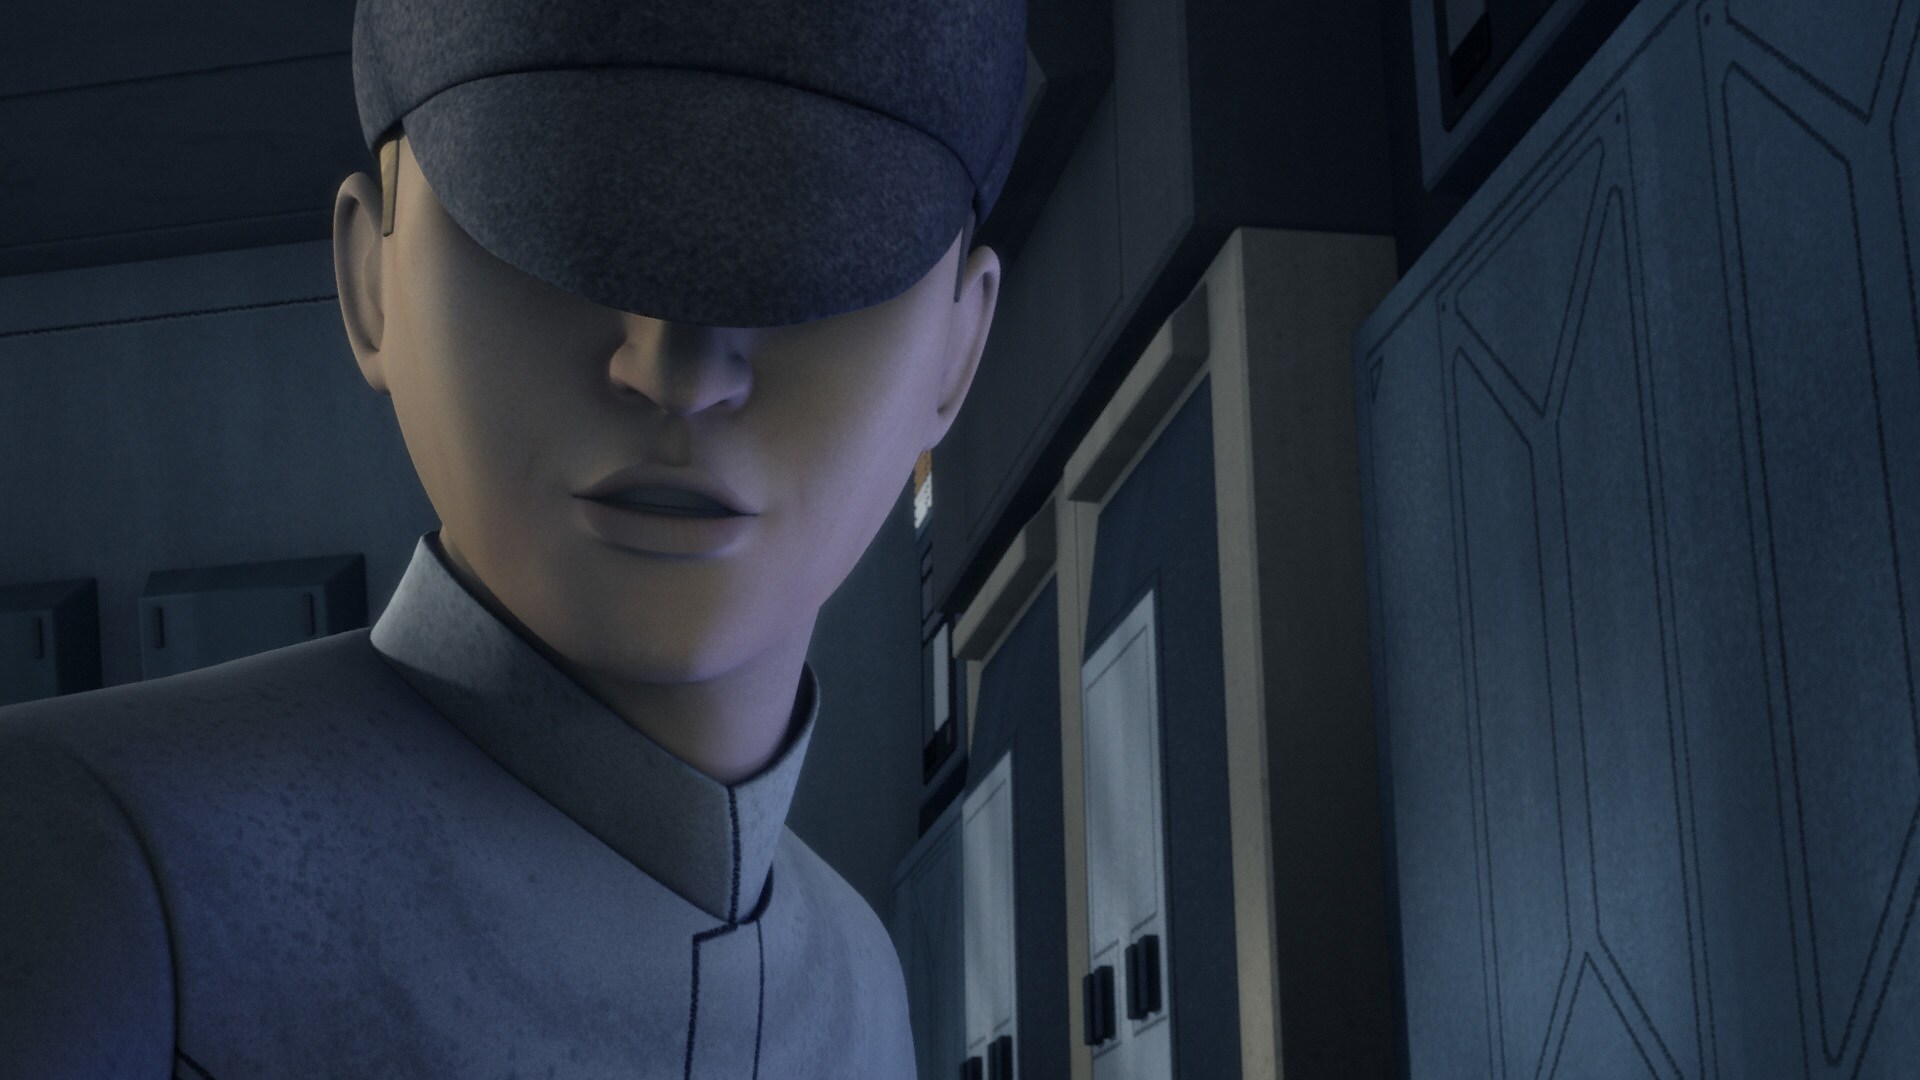 The Clone Wars series could reuse a single crewman model multiple times to populate a ship, since...